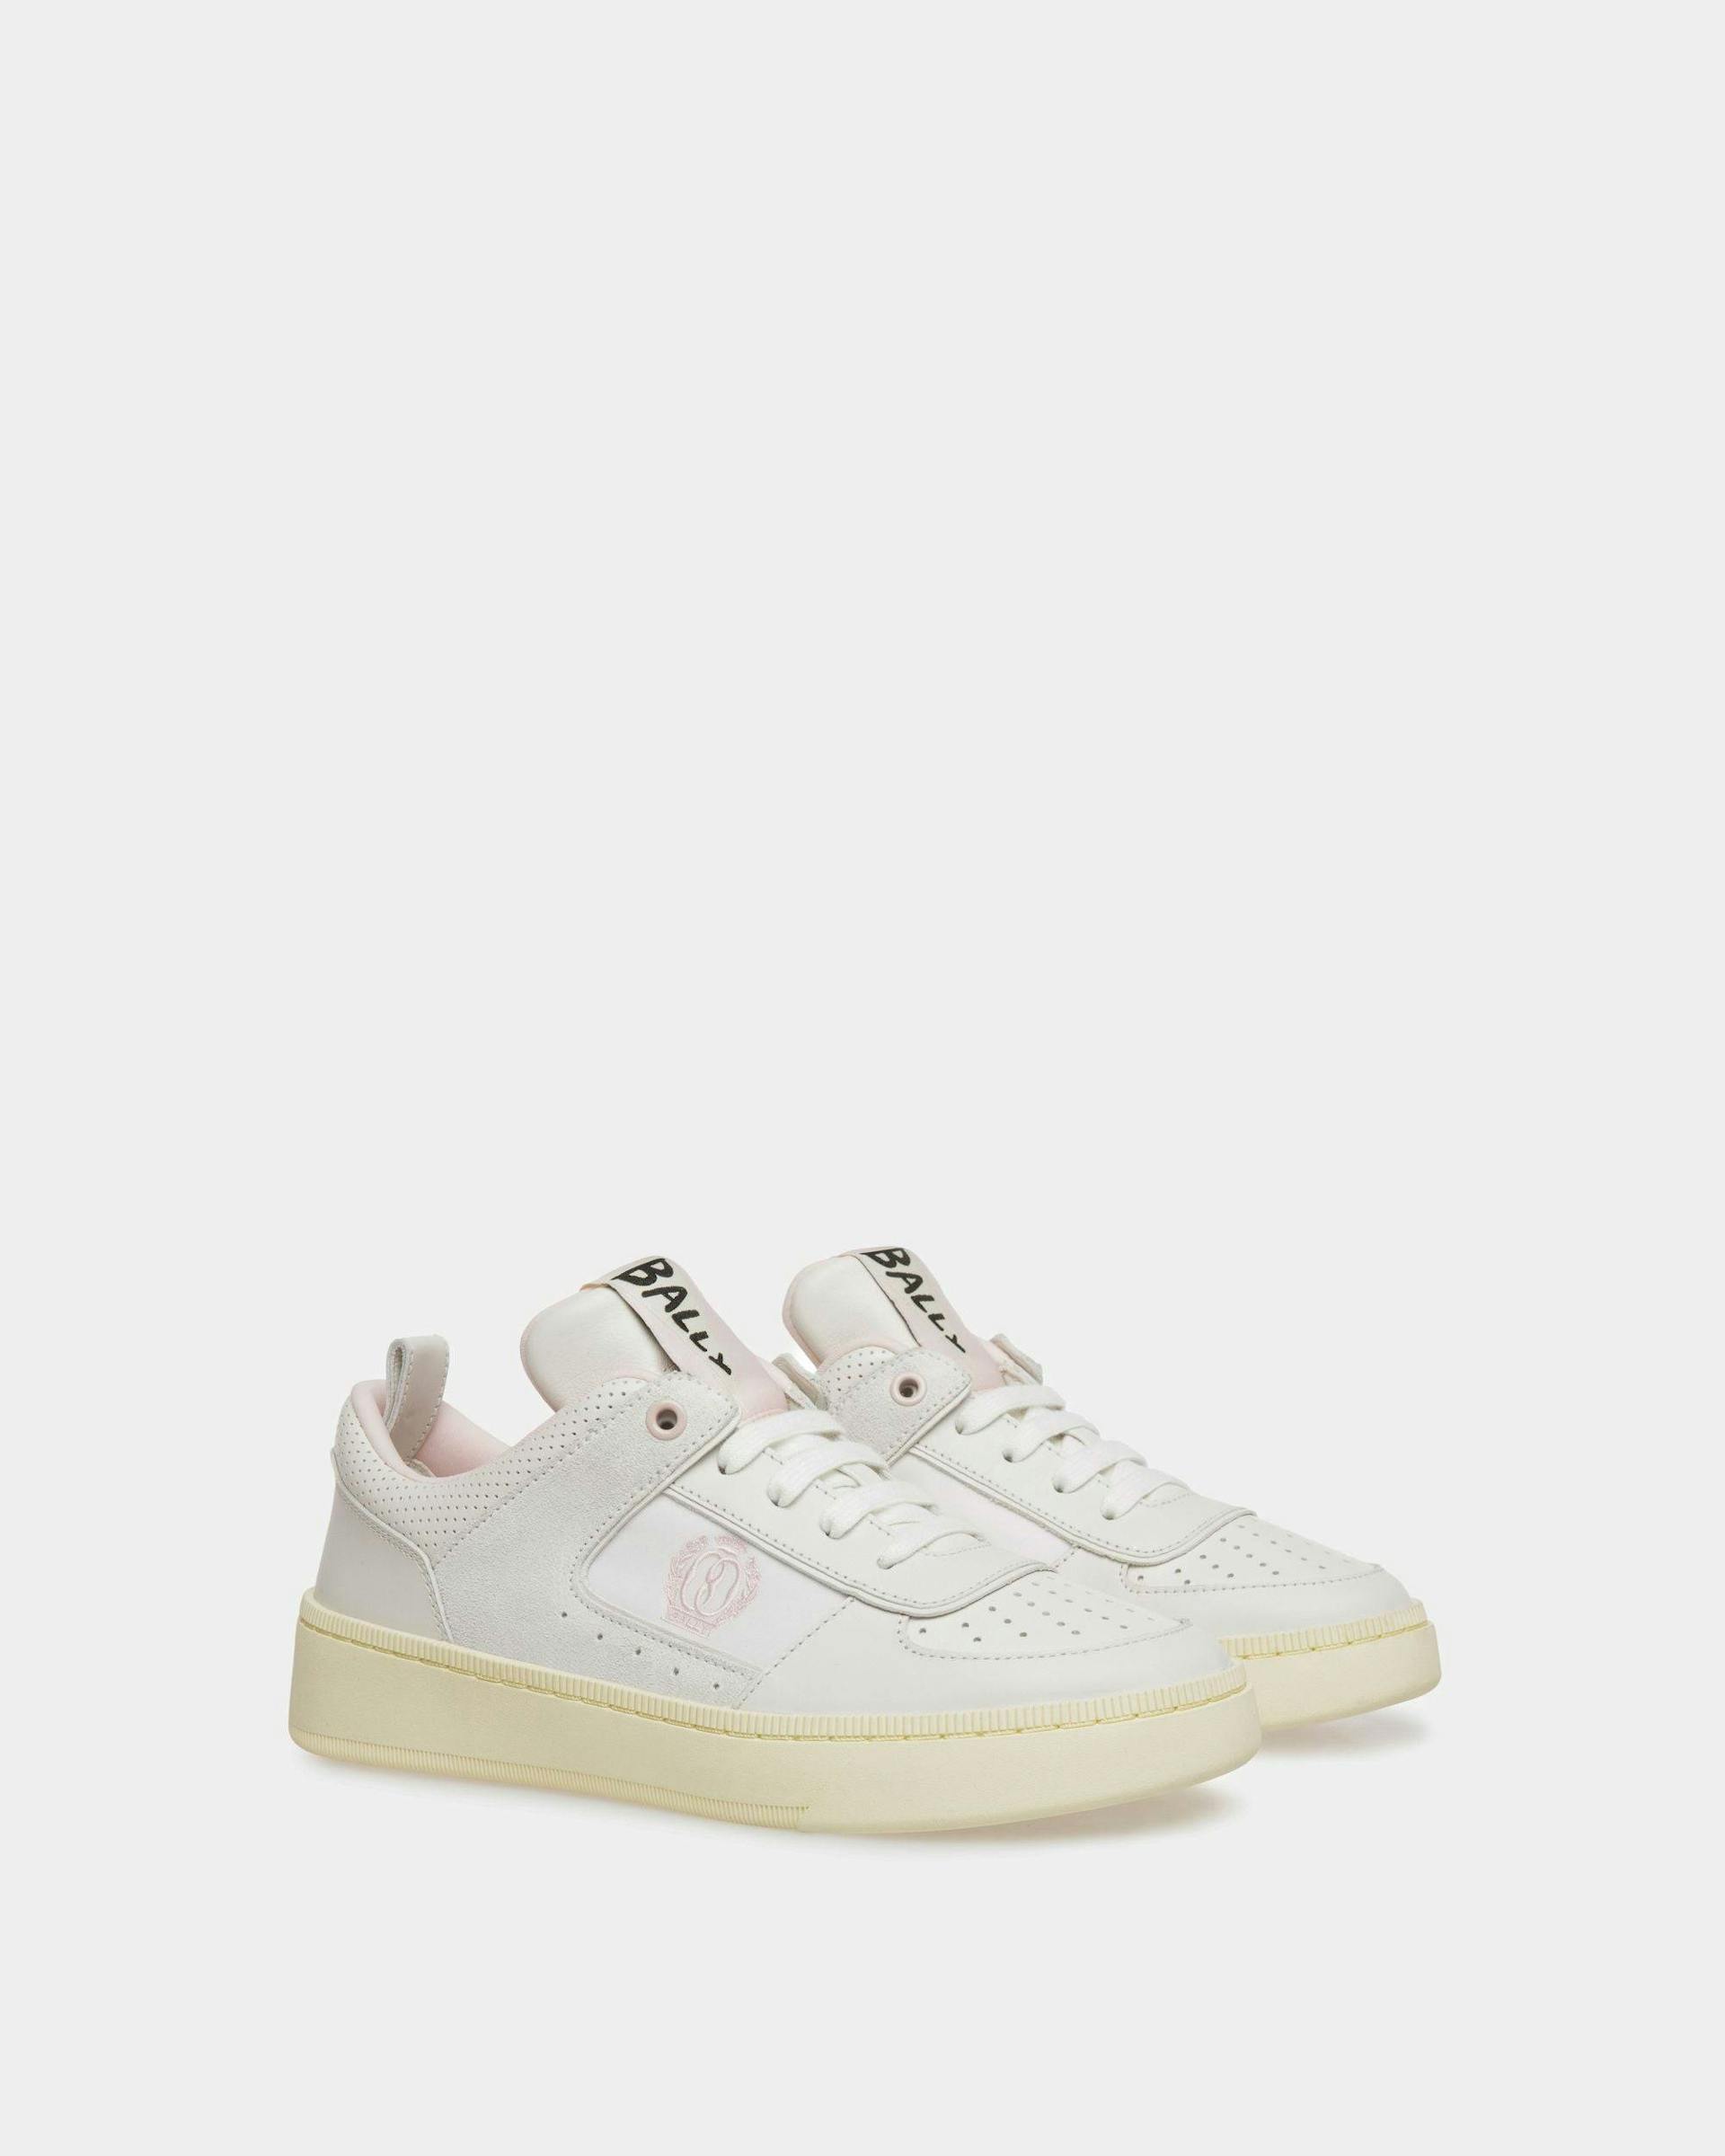 Raise Sneakers In White And Pink Leather - Women's - Bally - 02